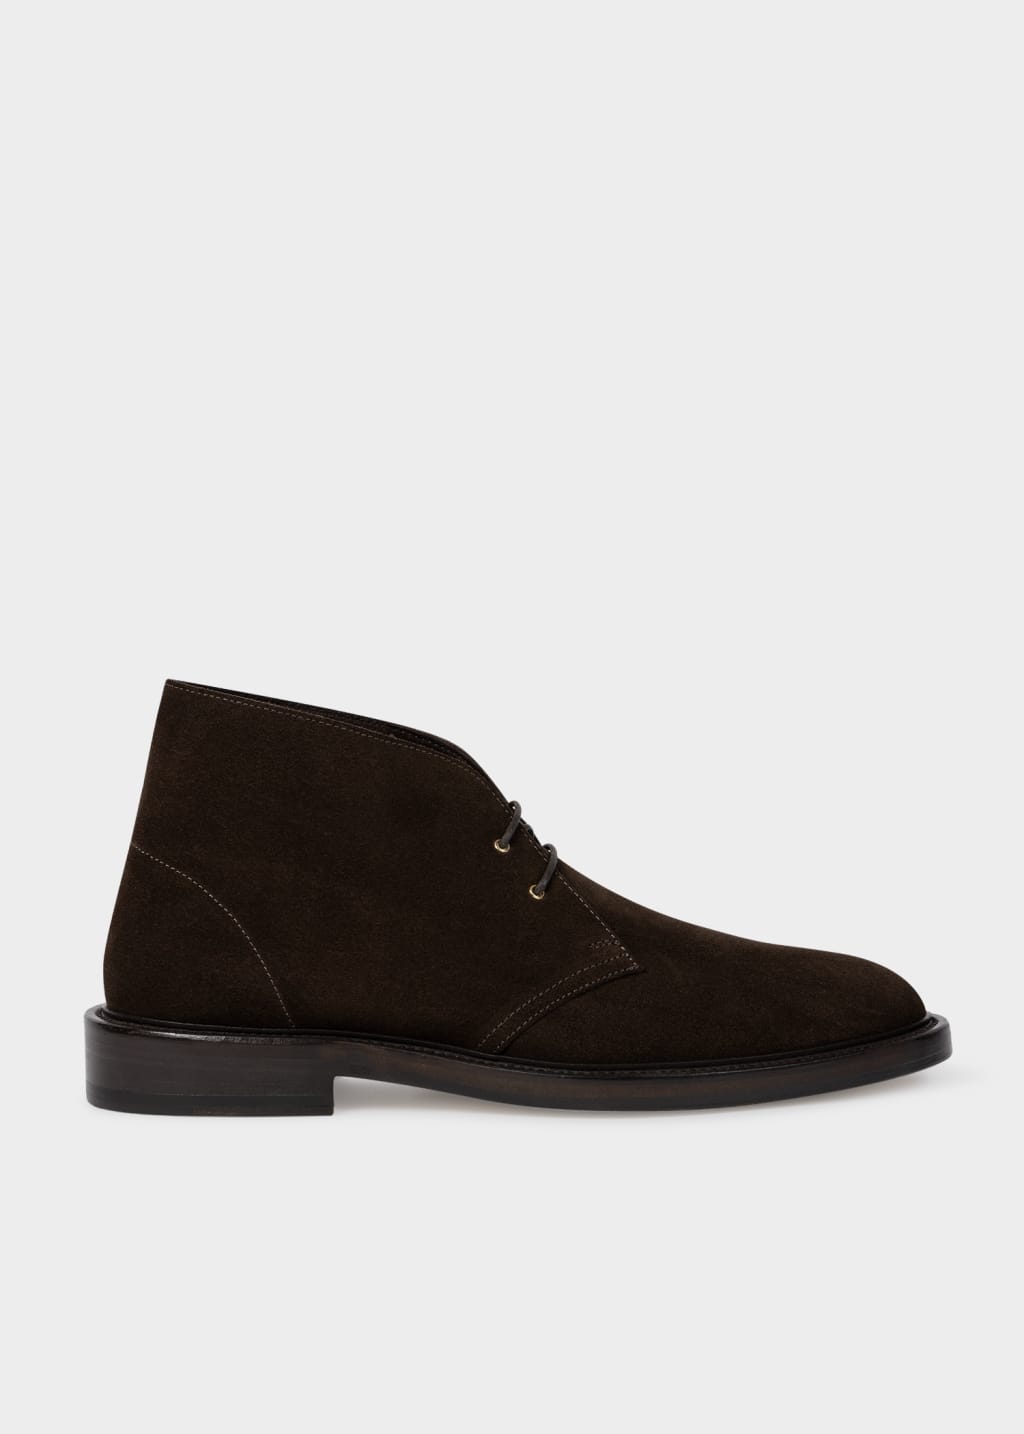 Detail View - Dark Brown Suede 'Kew' Boots Paul Smith